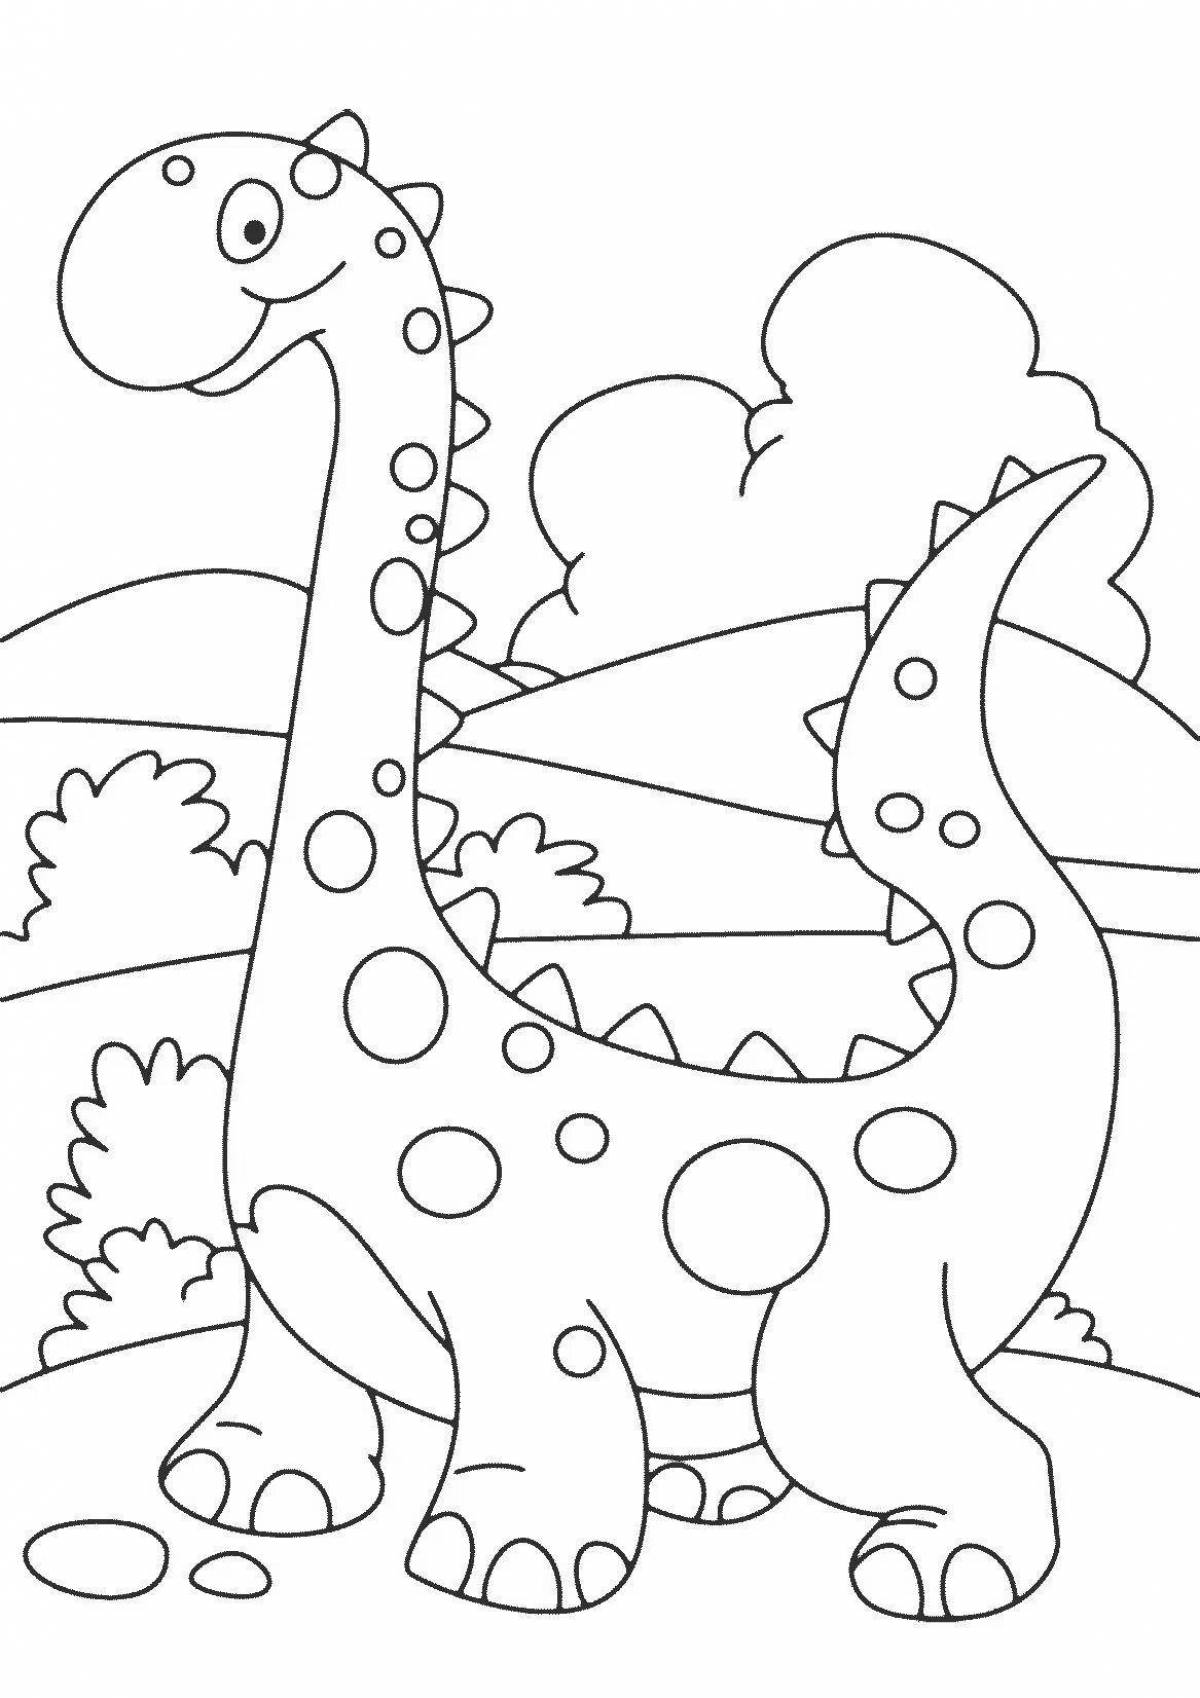 Crazy dinosaur coloring book for kids